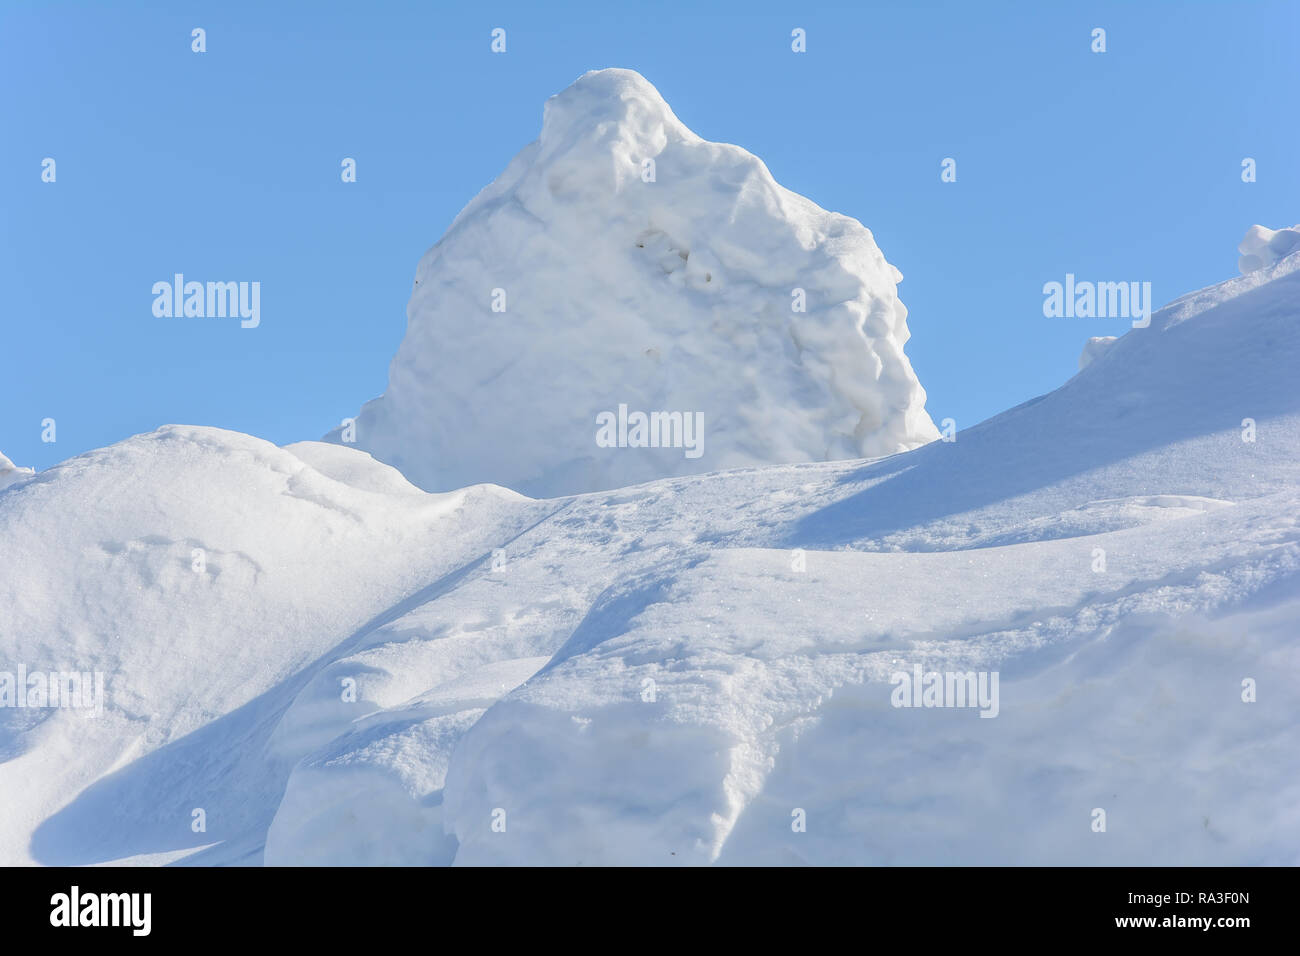 Huge snowy mountains in winter Stock Photo